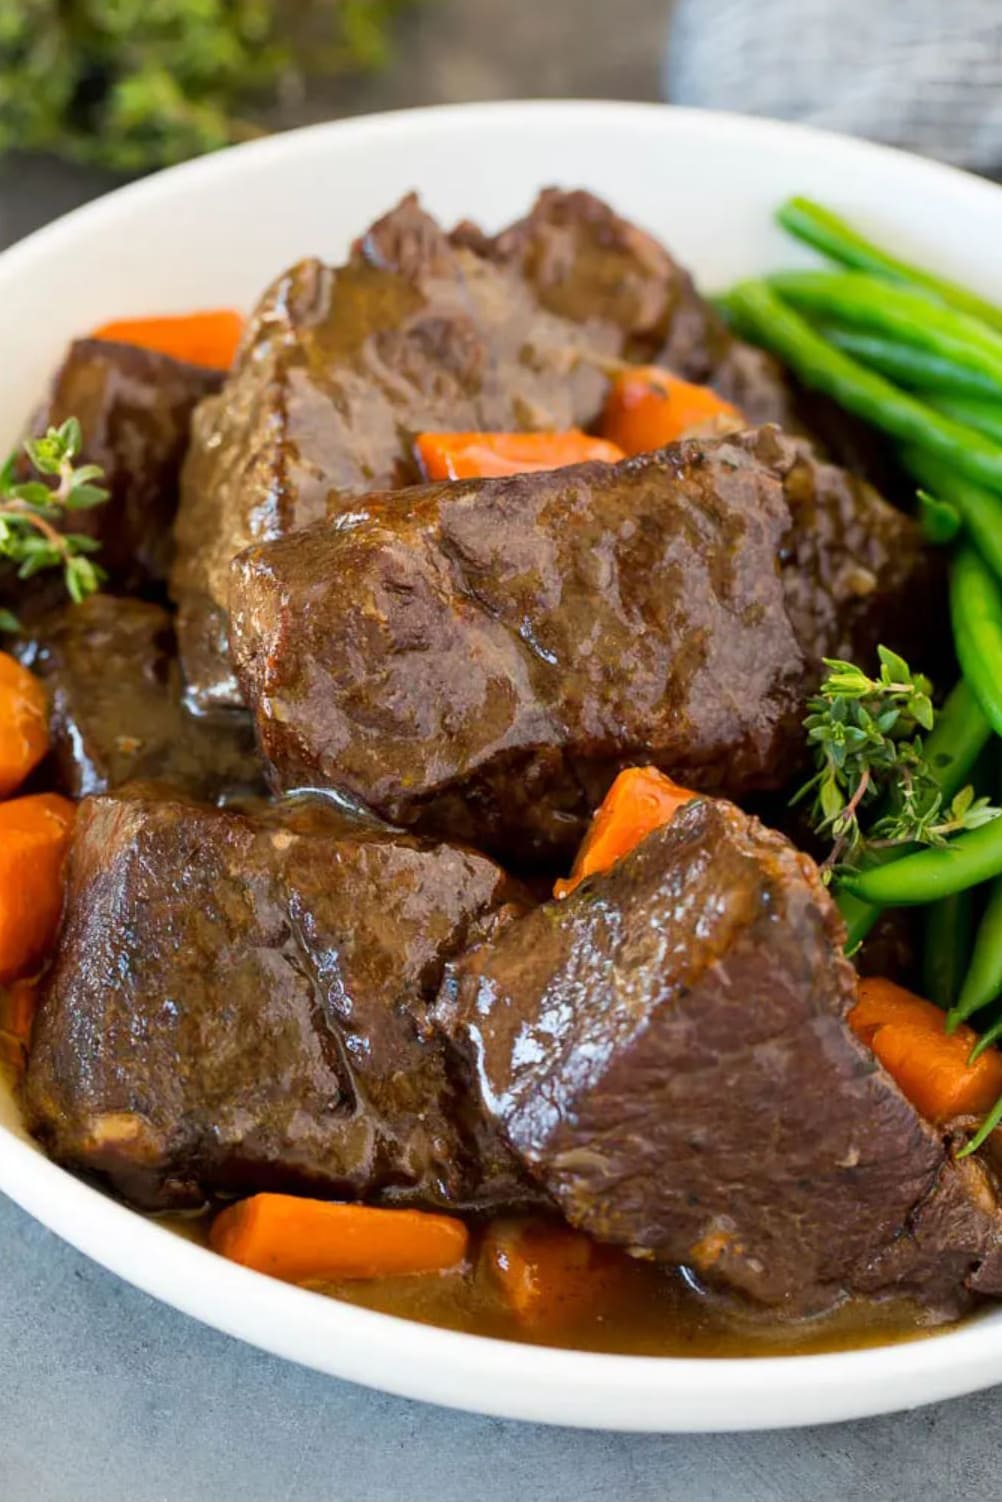 Short ribs covered in a type of gravy on a plate with carrots and green beans.